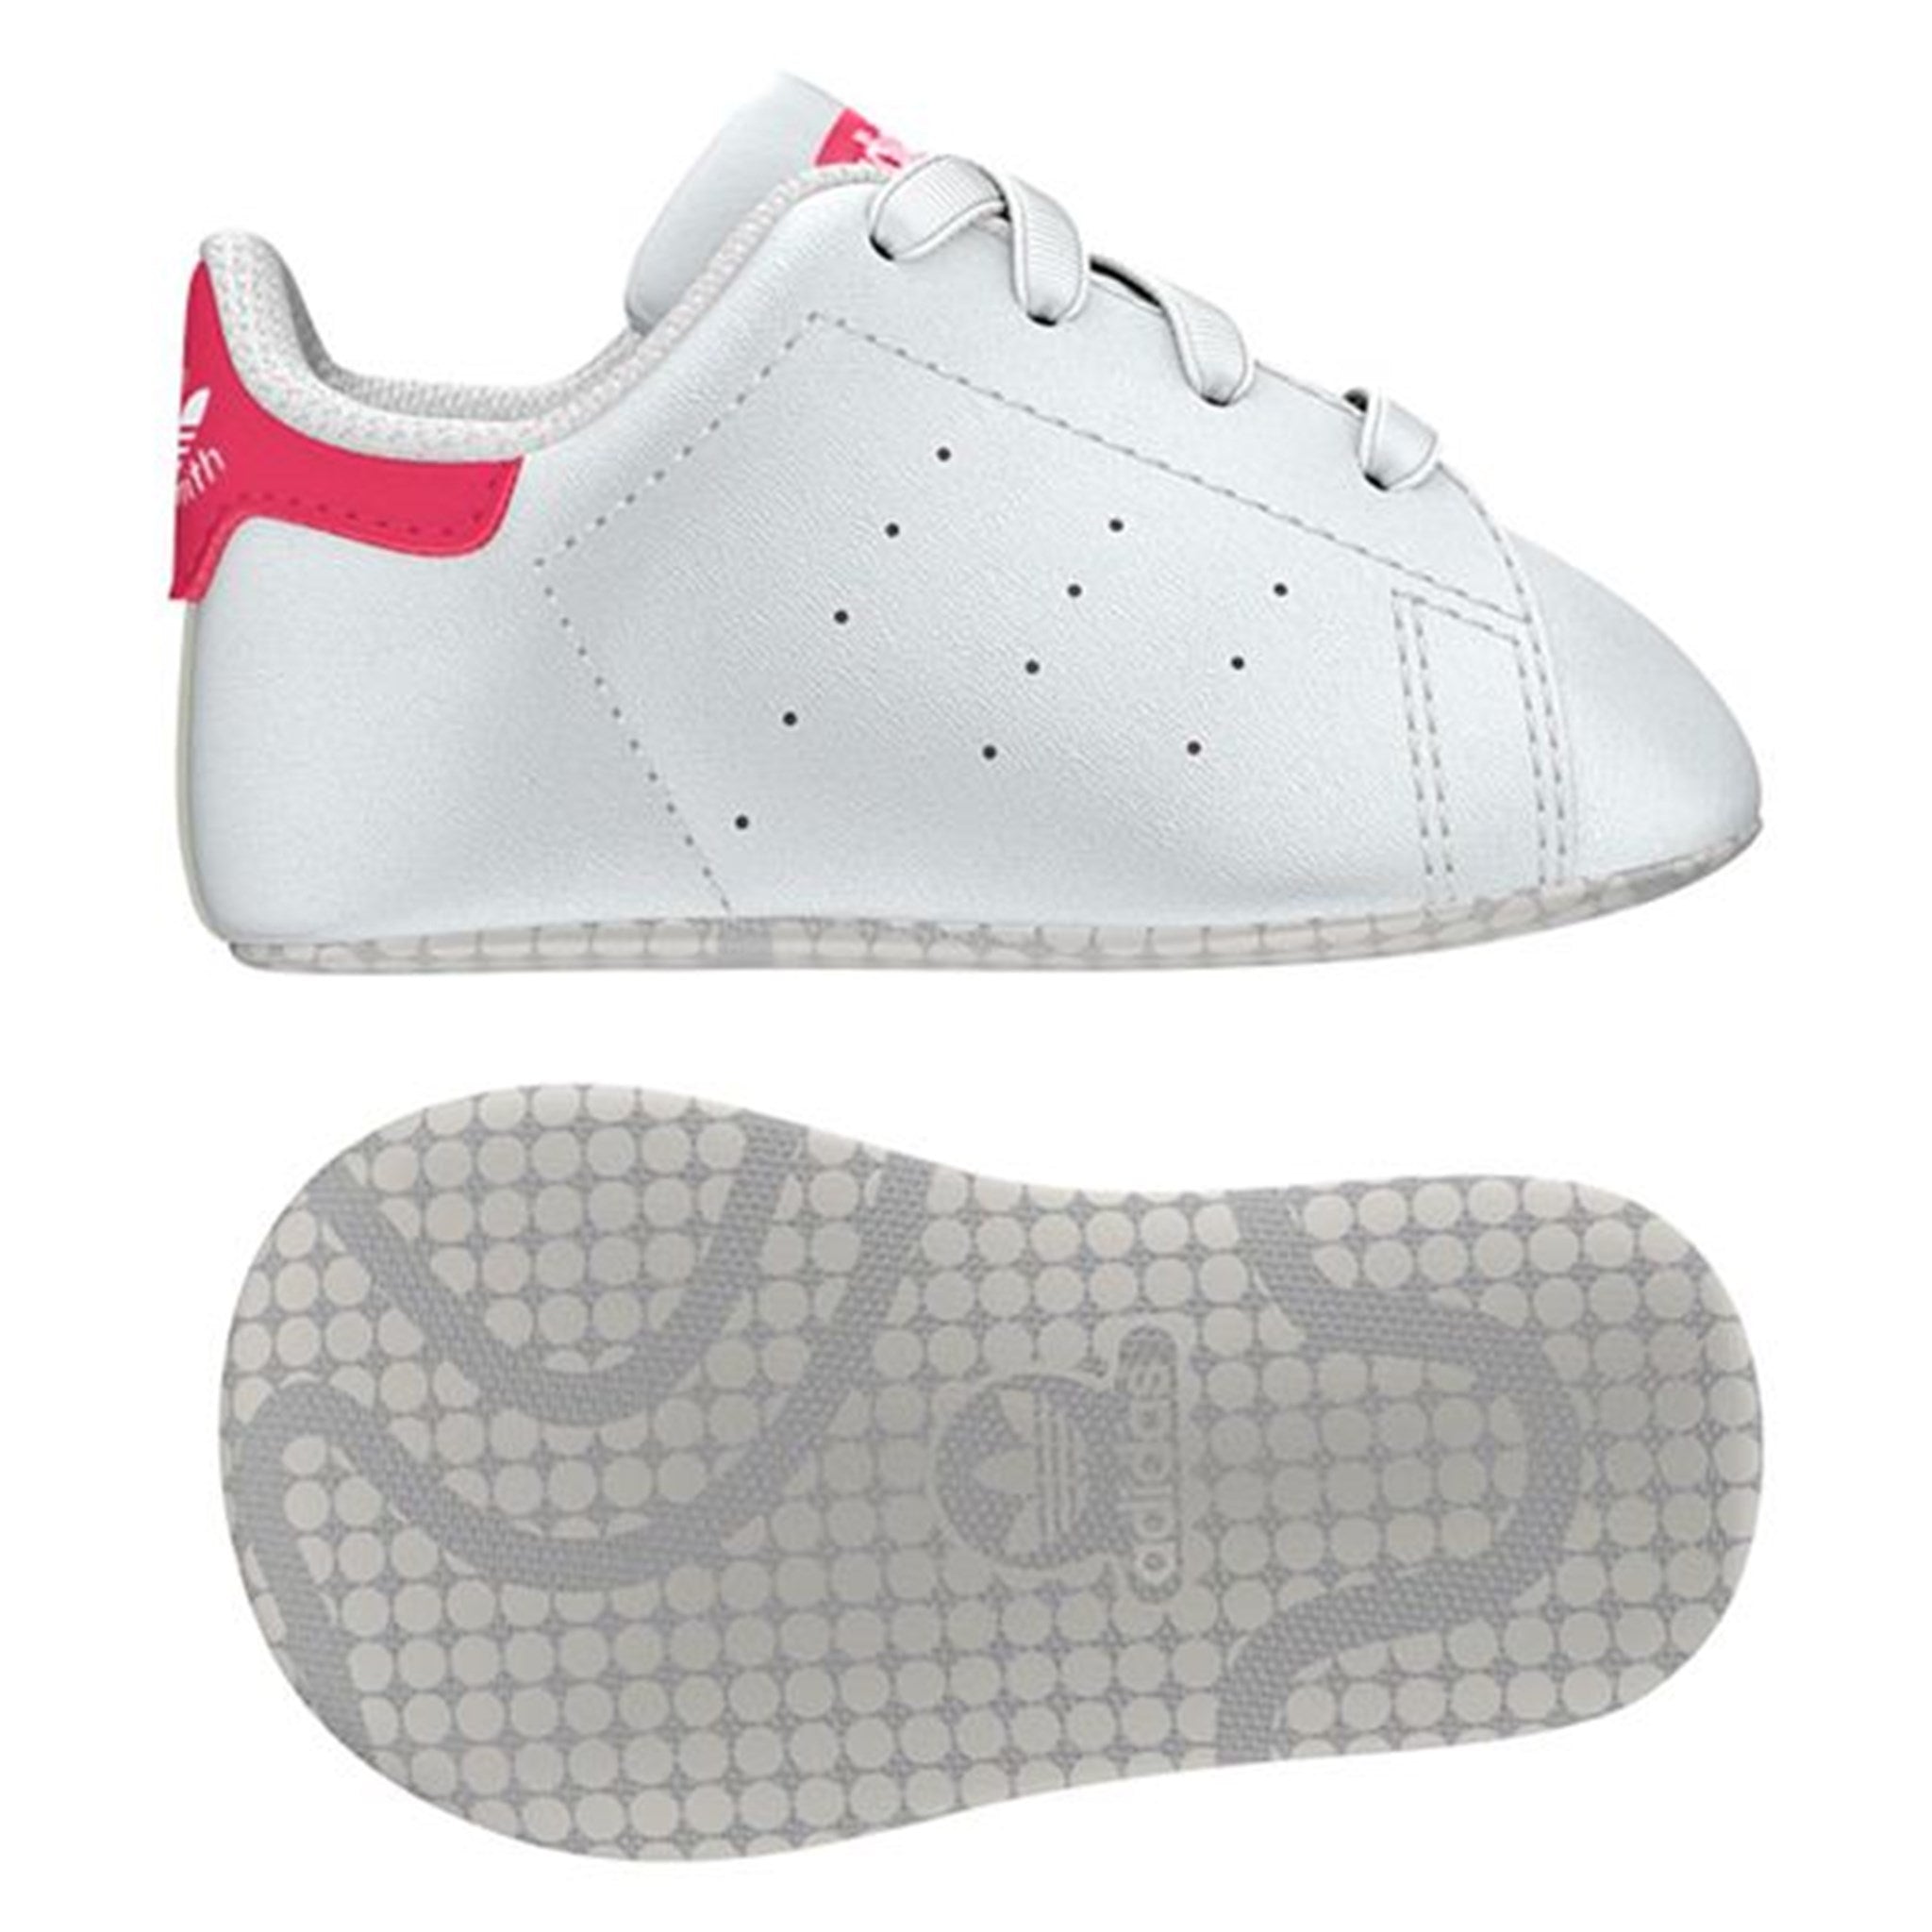 adidas Stan Smith Baby Sneakers White/Pink S82618 5